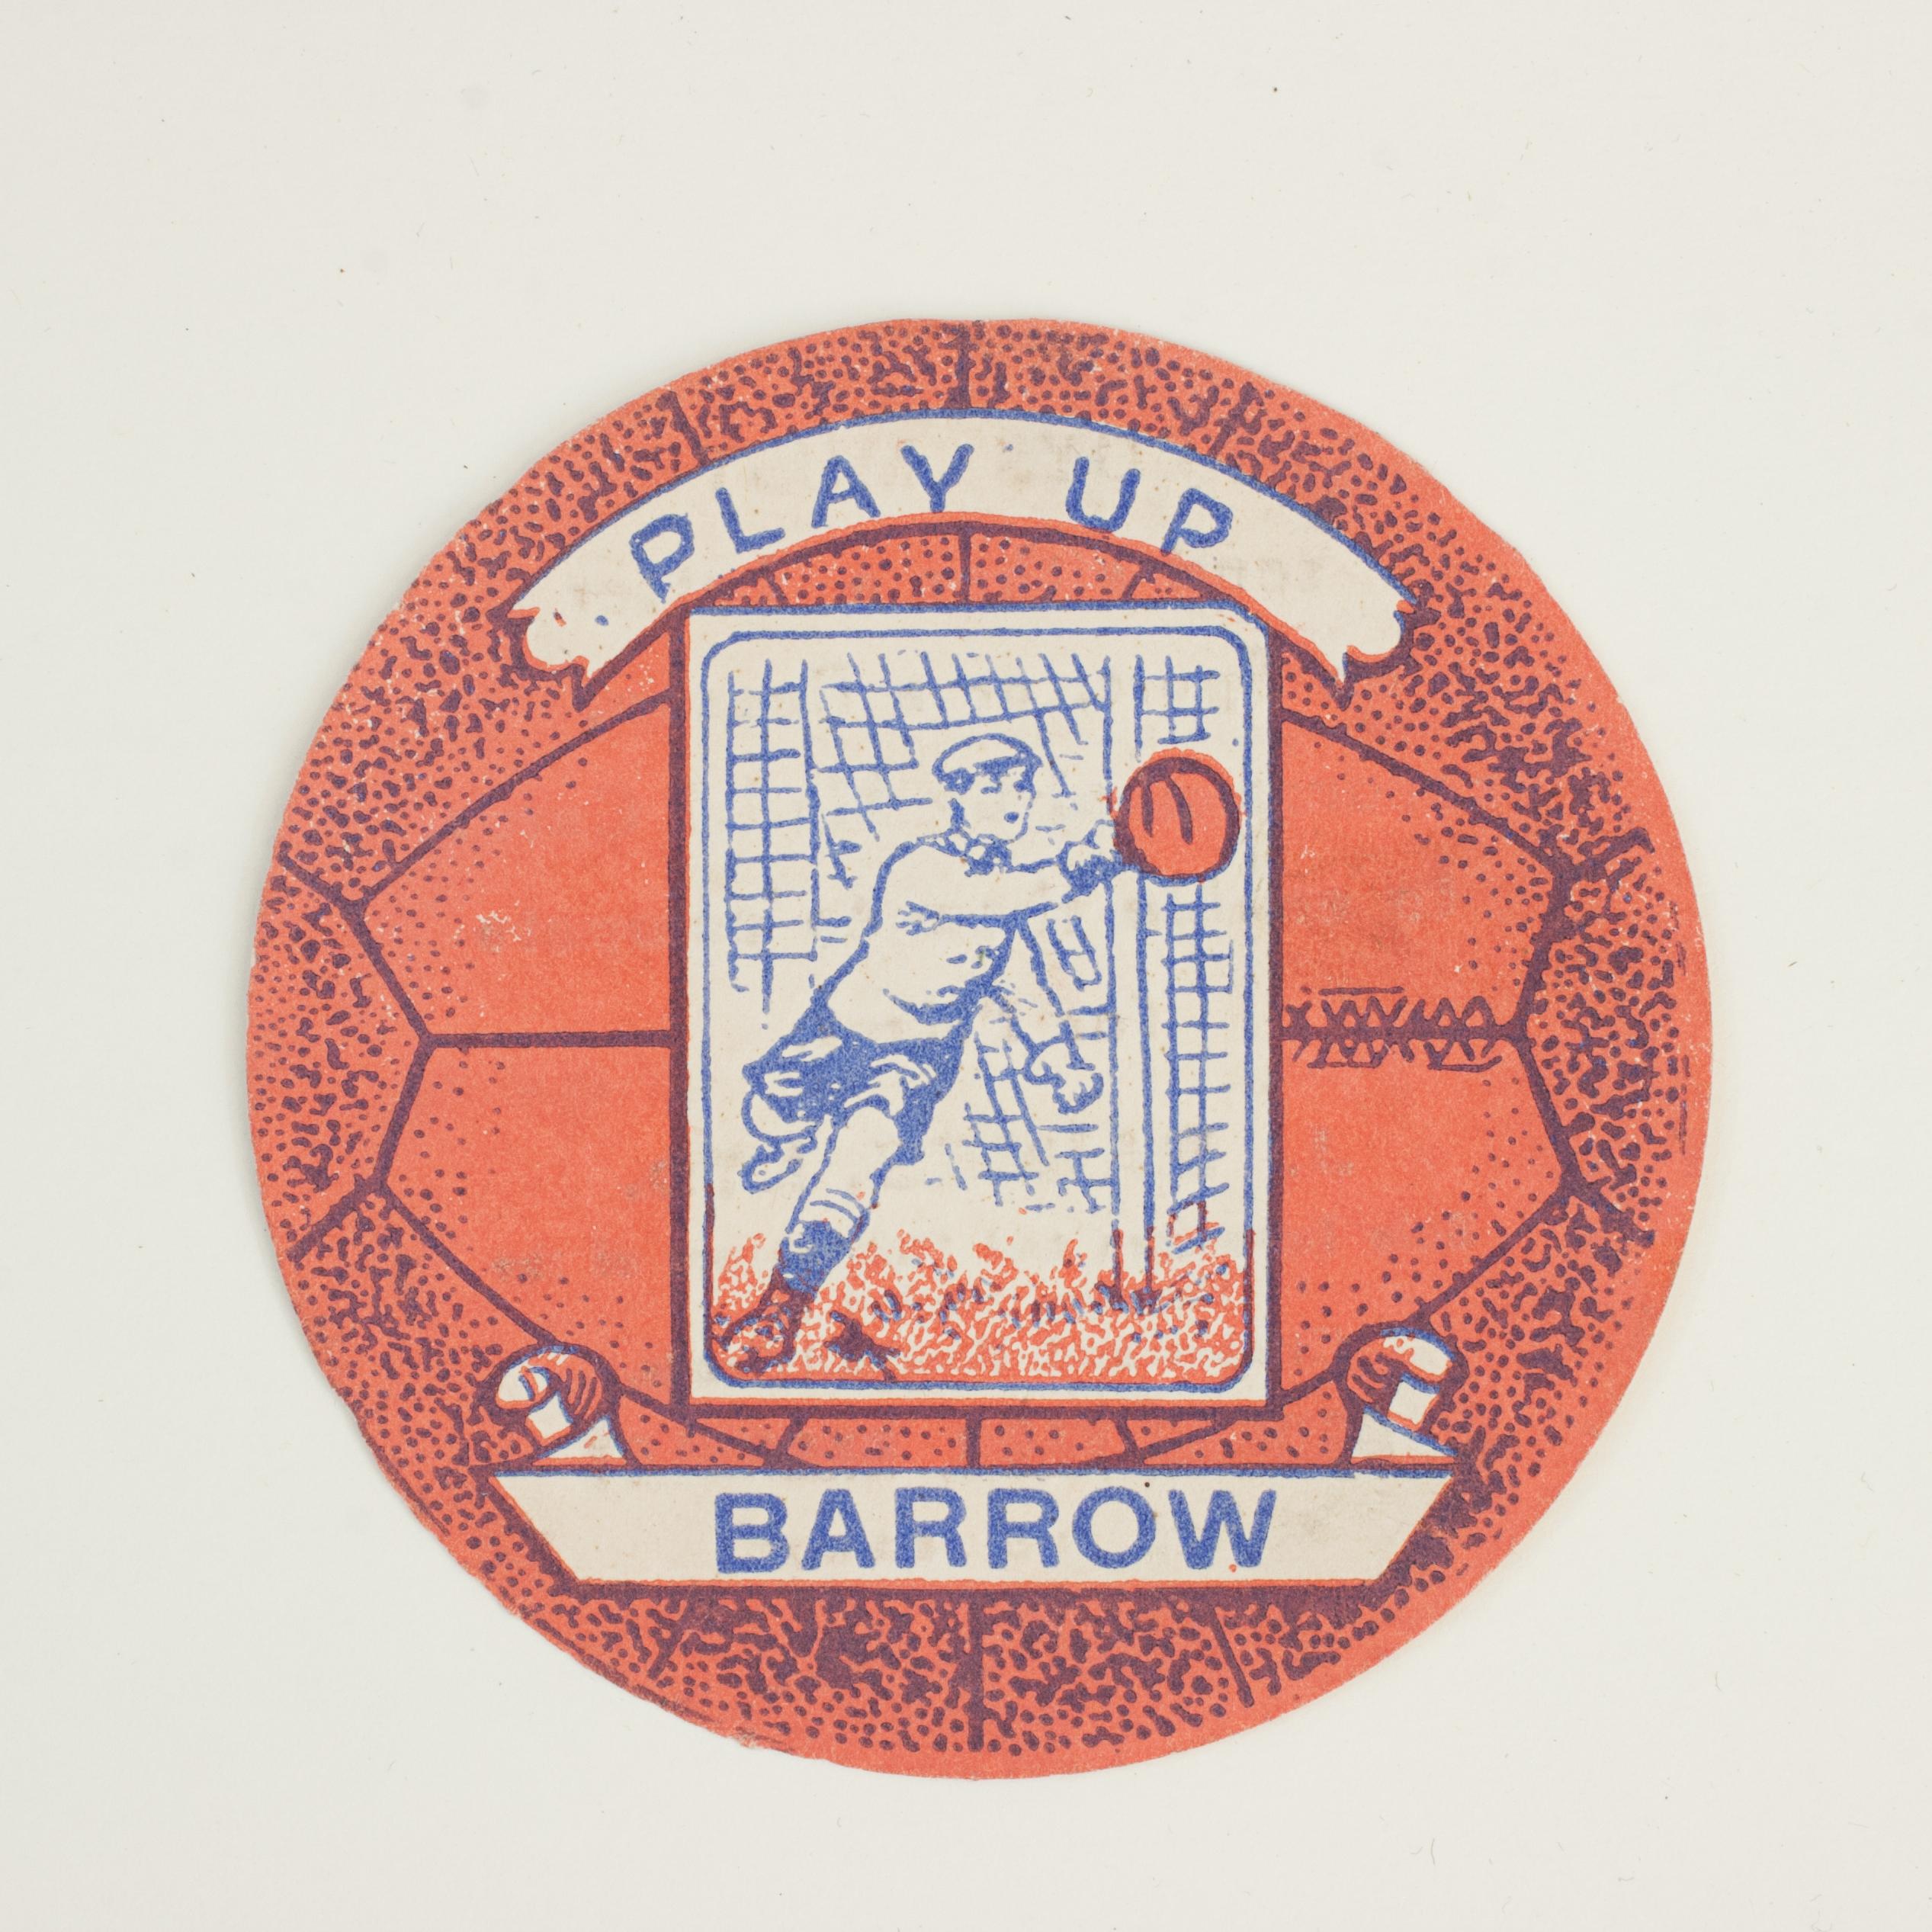 Sporting Art Baines Football Trade Card, Barrow, Play Up For Sale